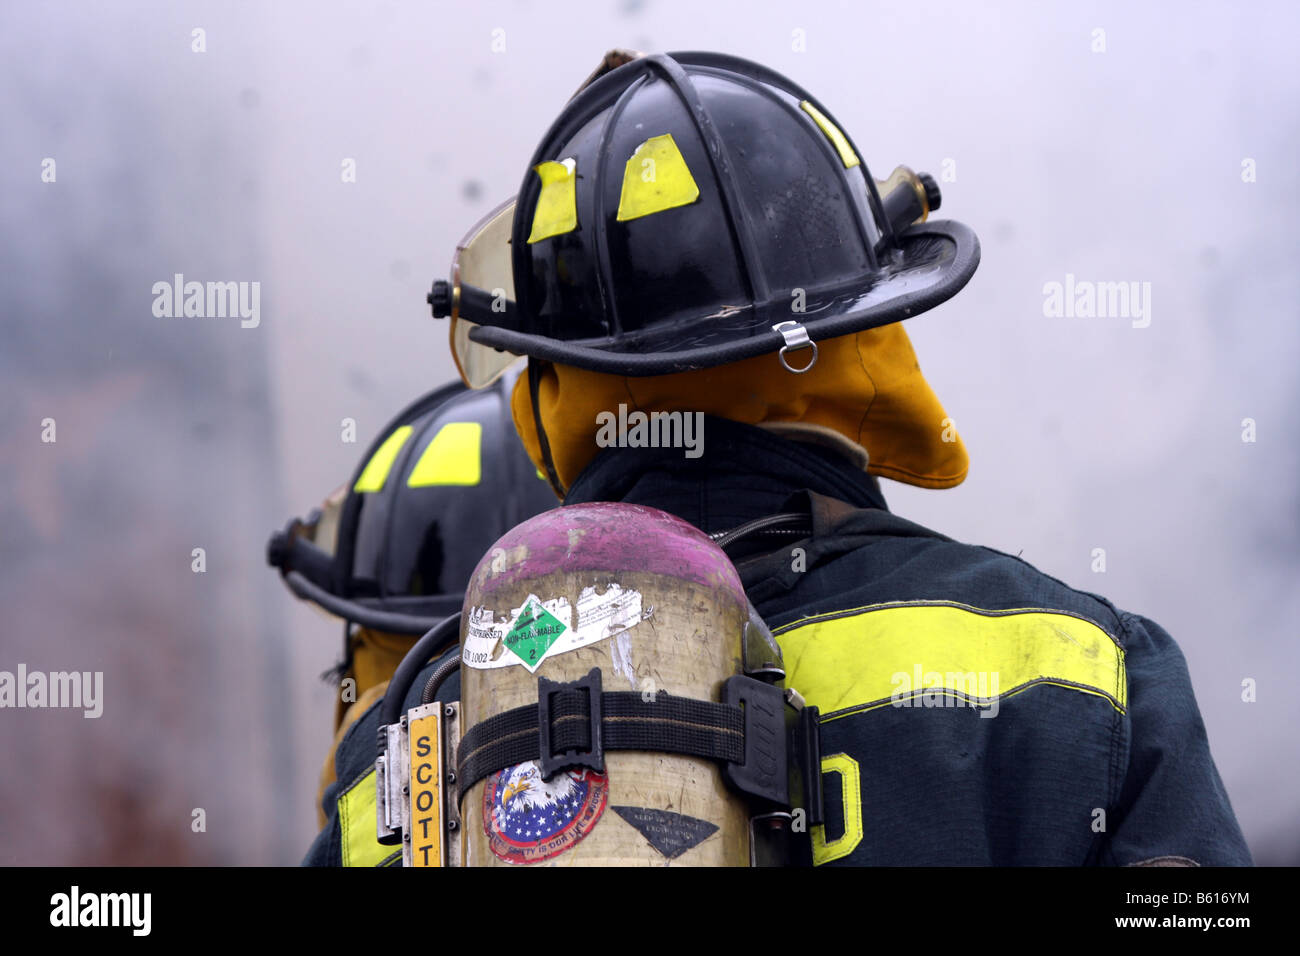 Two fire fighters surrounded by smoke while putting out a fire Stock Photo